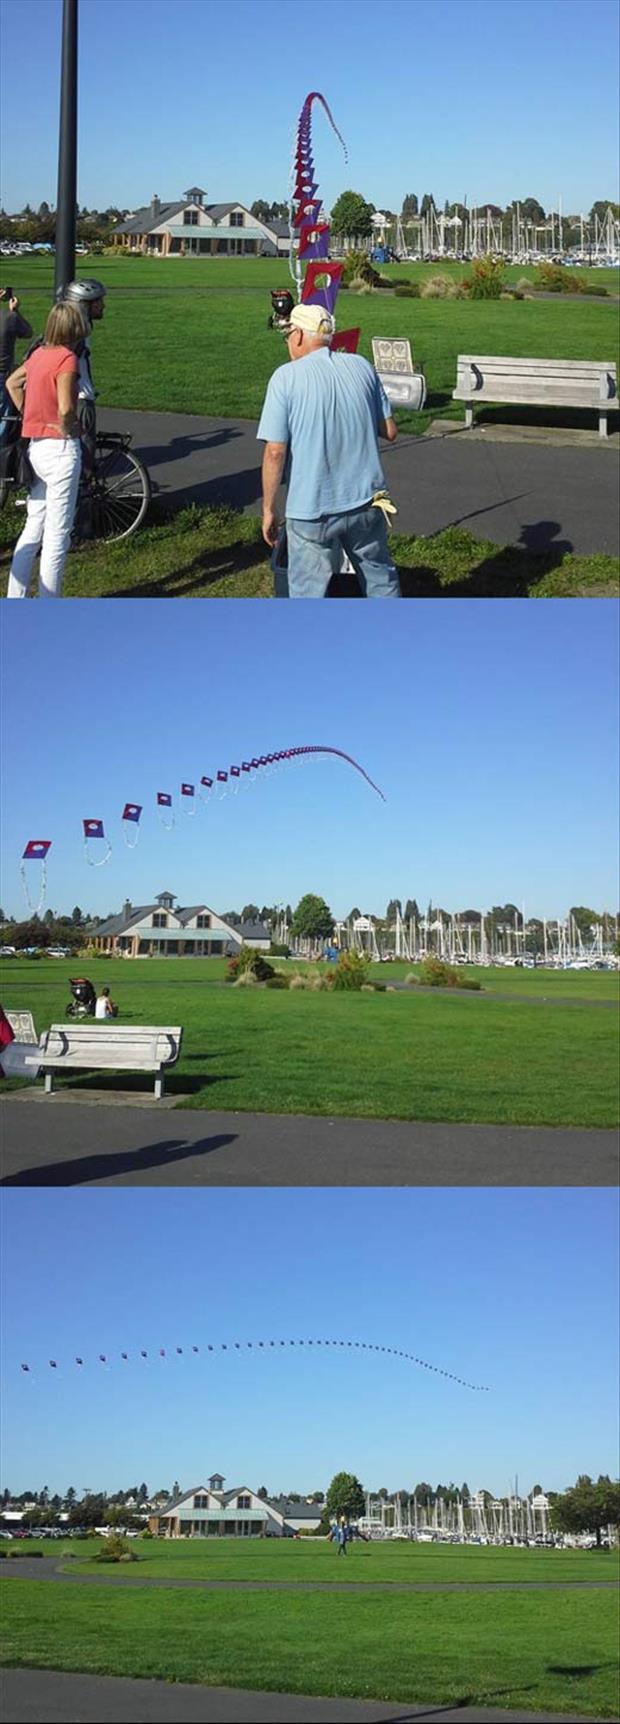 the best kite ever